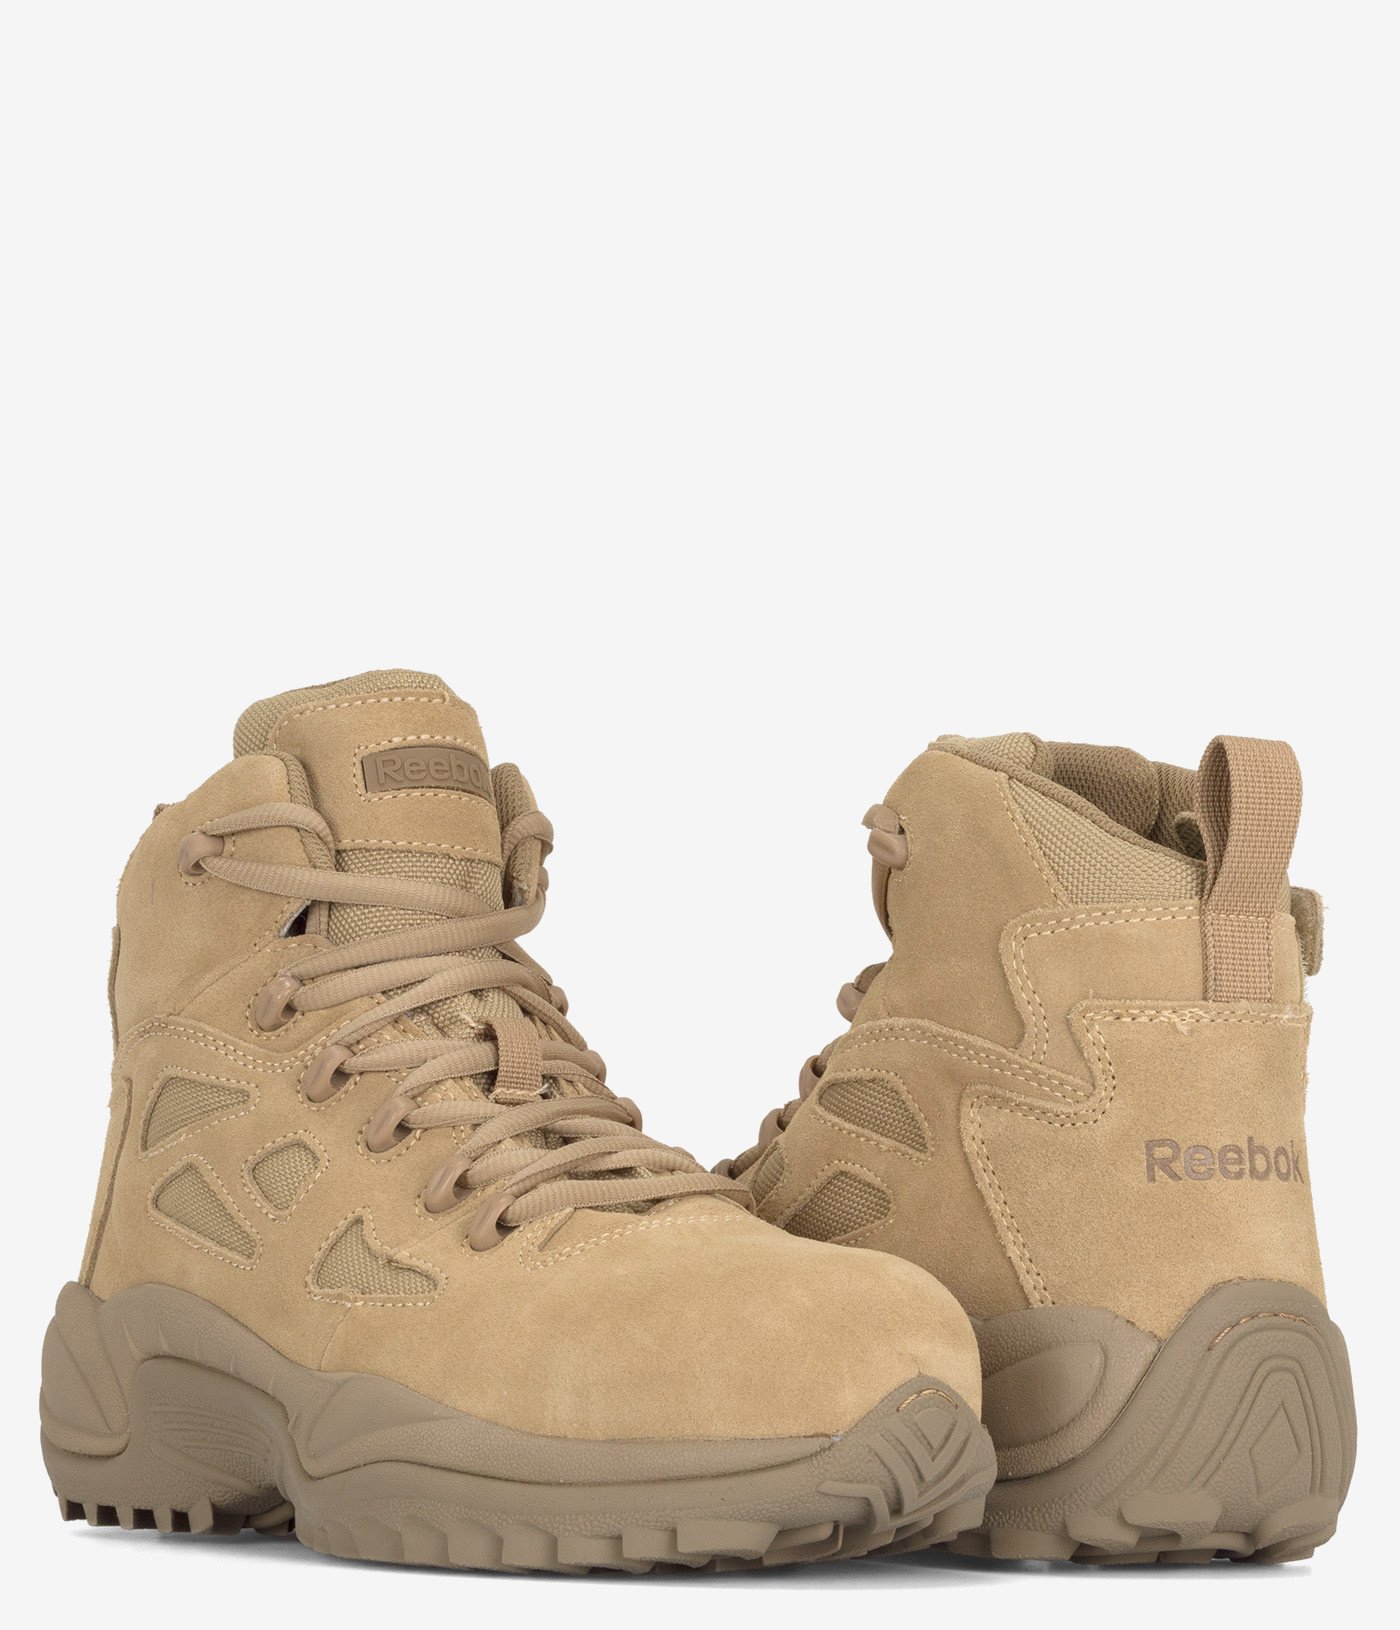 Reebok Rapid Response Composite Safety Toe EH Boot 